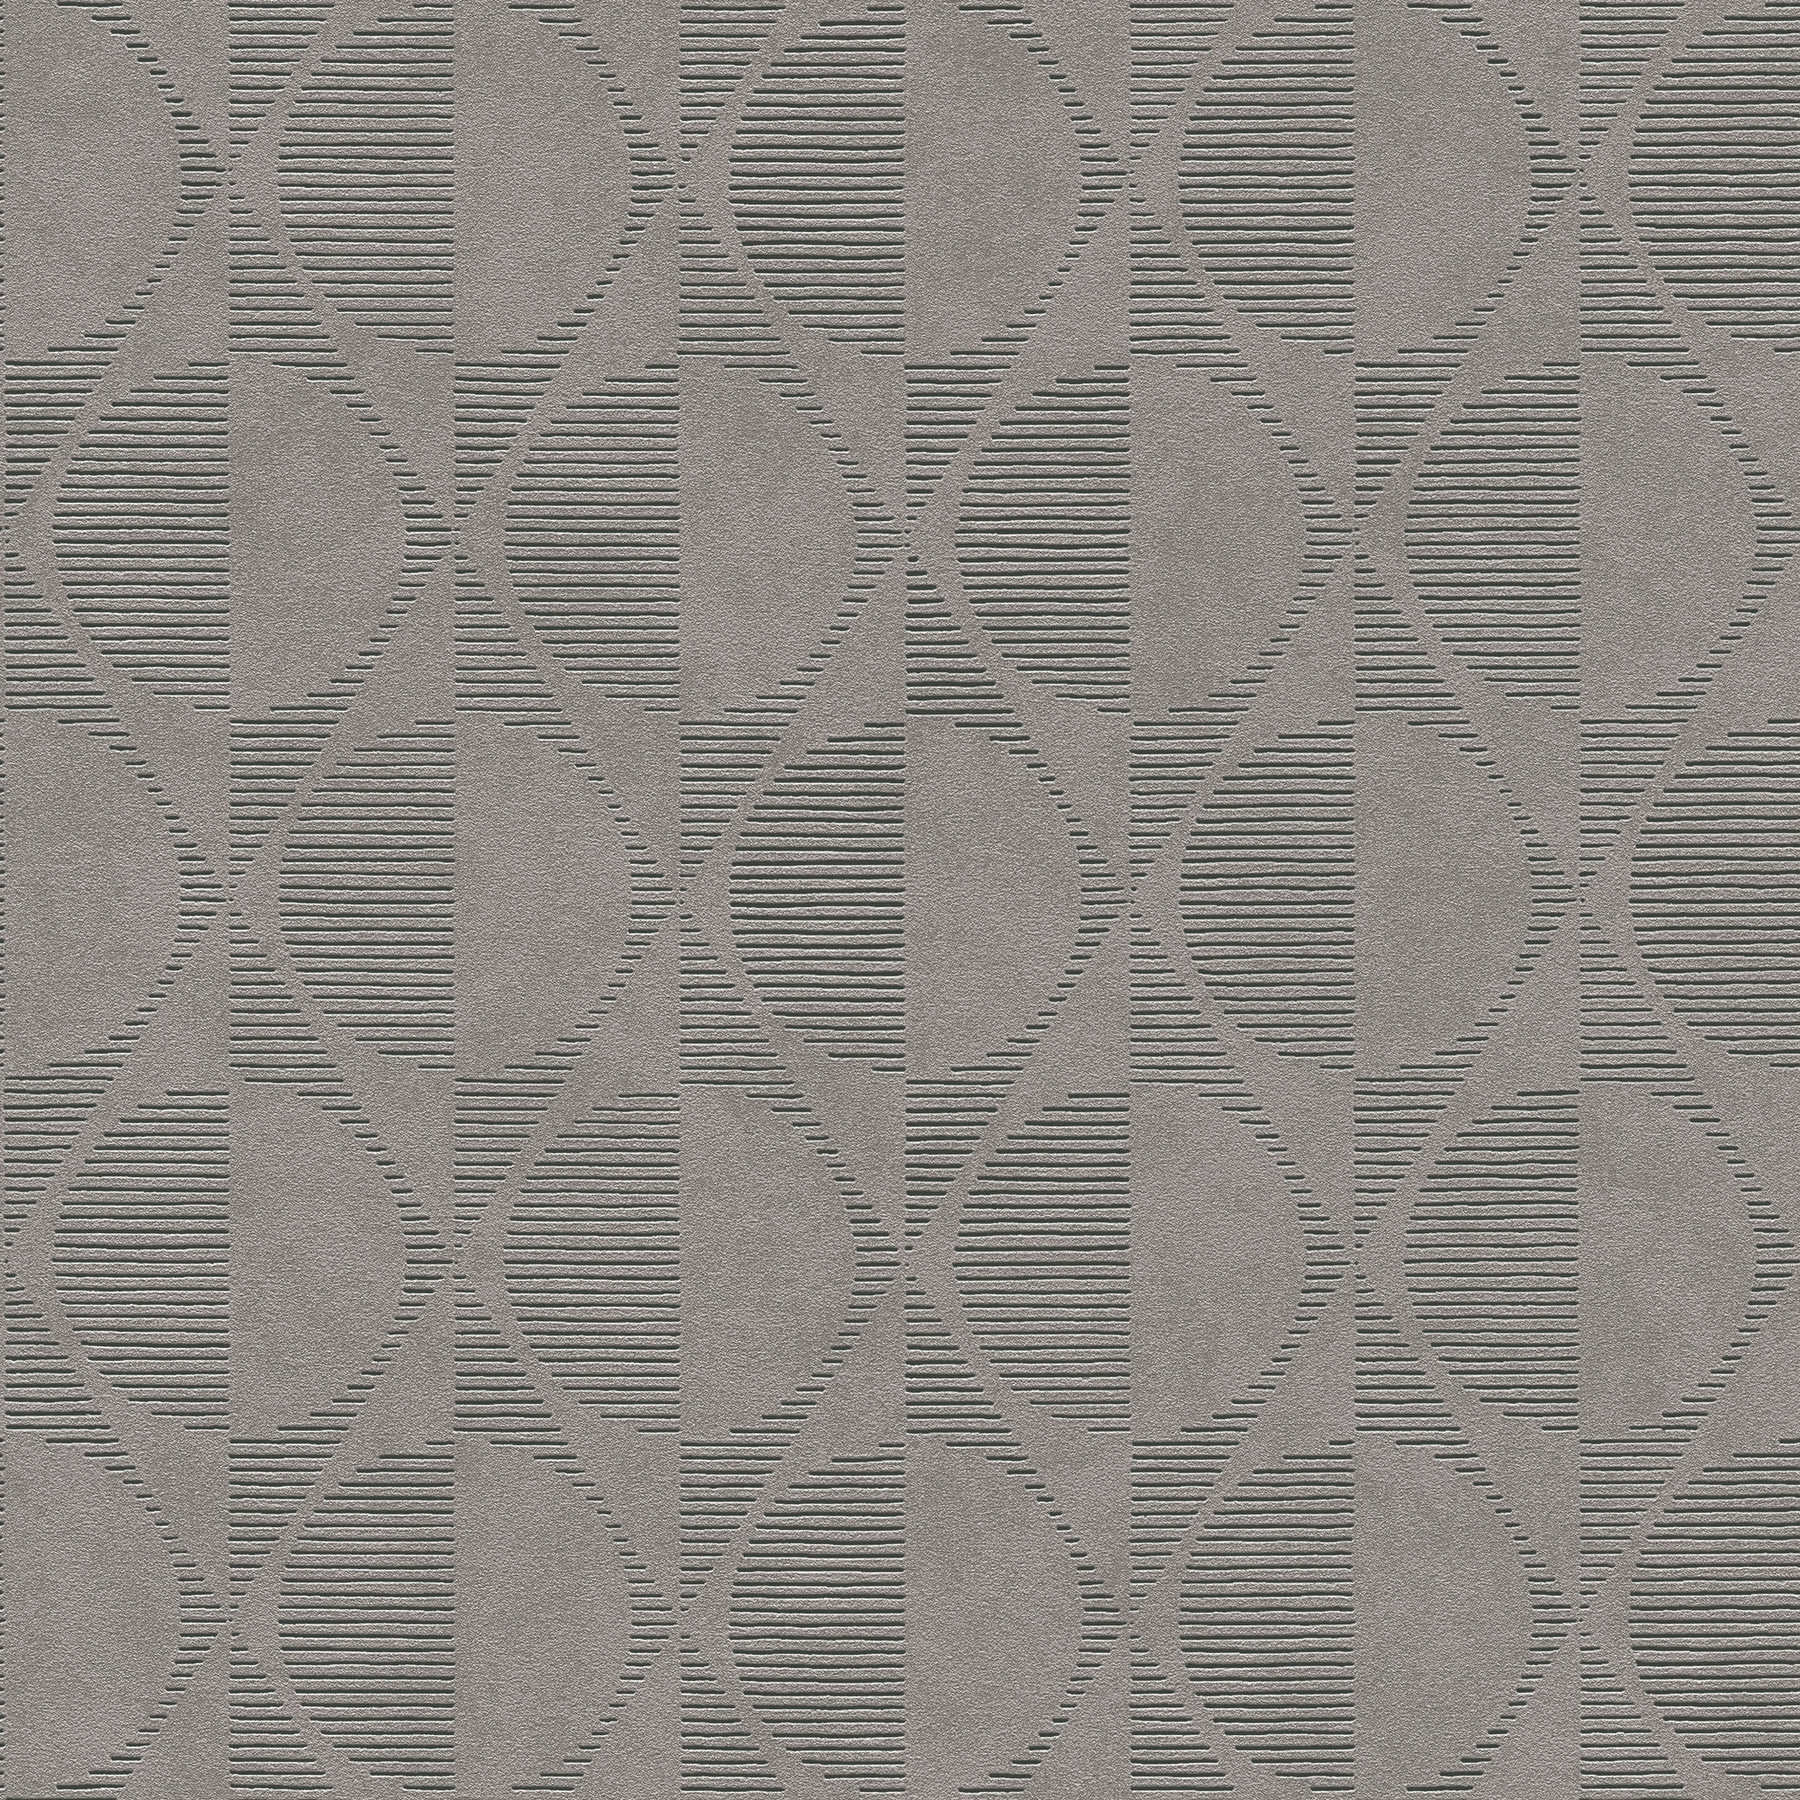 Retro wallpaper with circle and diamond pattern - grey, beige, black
